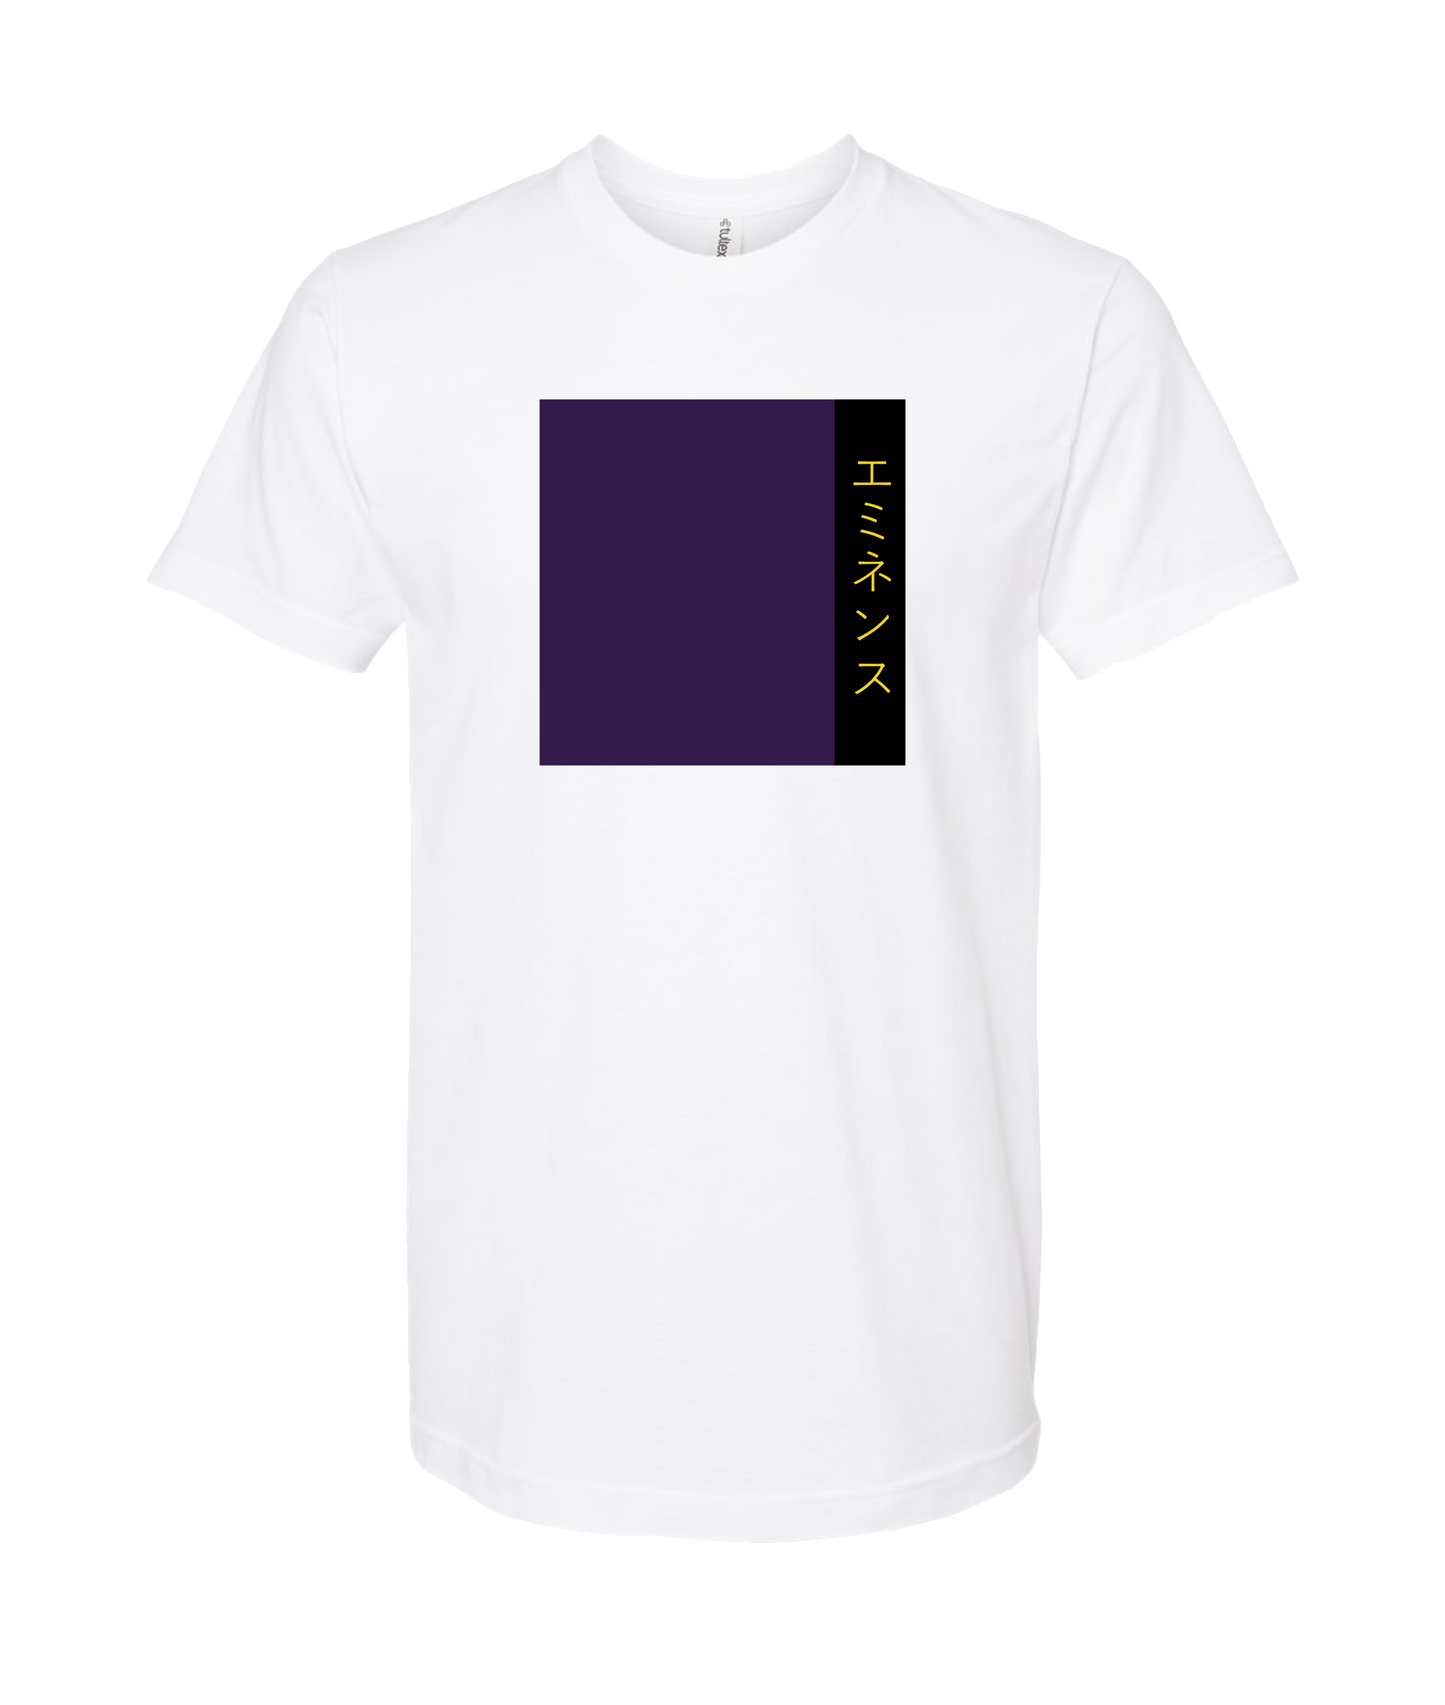 atomicclothing.com - Purple and Stripe - White T Shirt